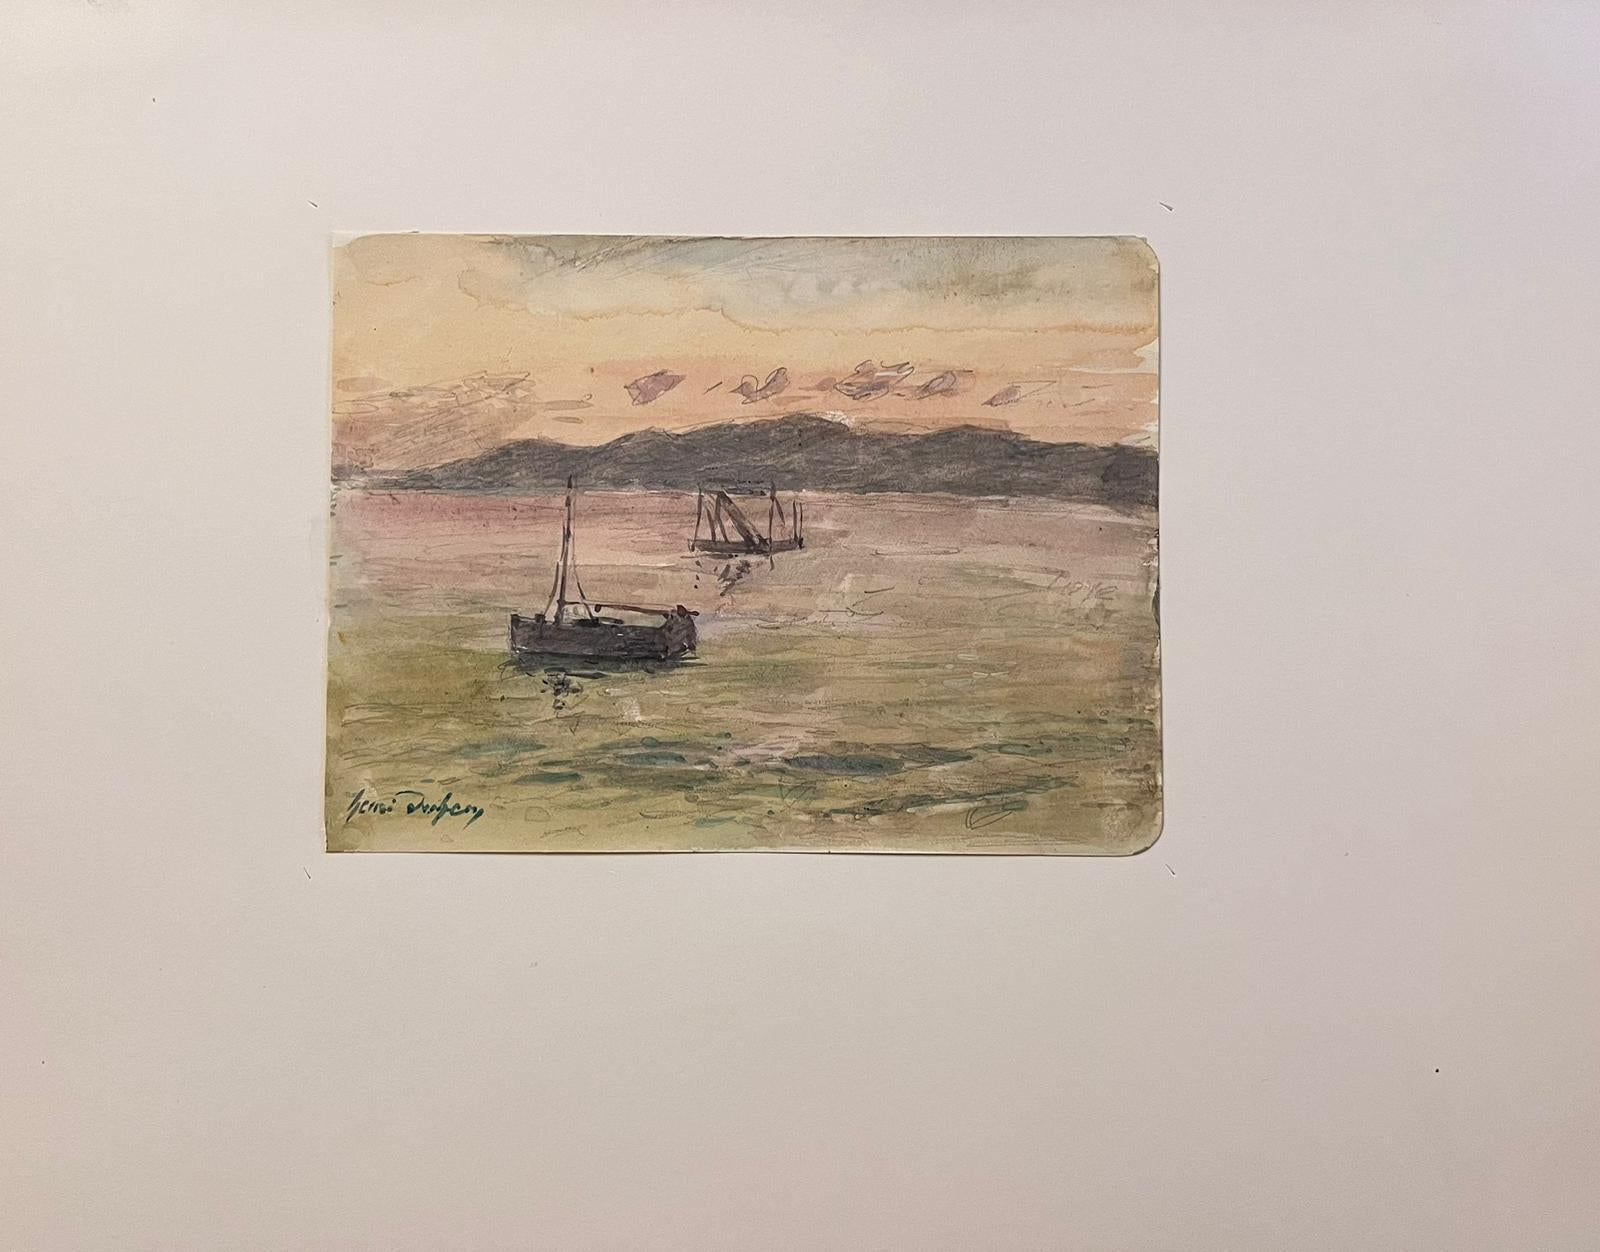 The artist: 
Henri Aime Duhem (1860-1941) French *see notes below, signed 

Title: Boats at Sunset

Medium:  
gouache on paper, loosely laid over card, unframed

card: 9.75 x 12.75 inches
painting: 4 x 6.75 inches

Provenance: 
private collection of